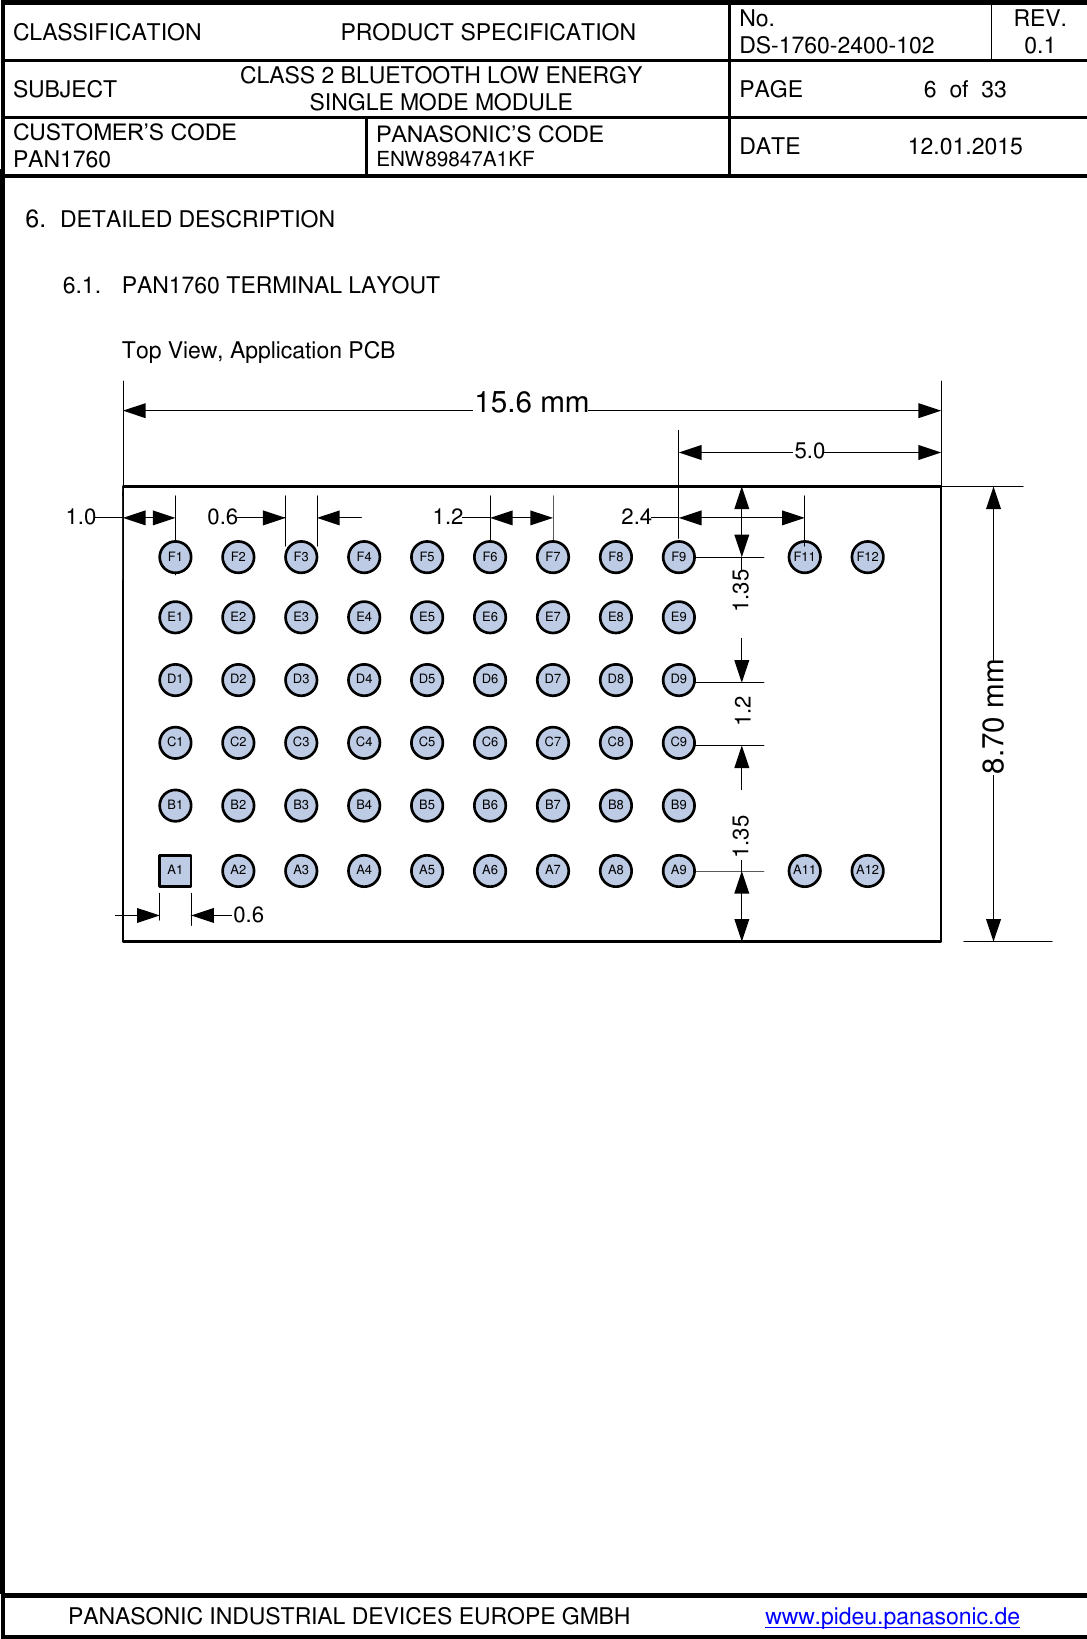 CLASSIFICATION PRODUCT SPECIFICATION No. DS-1760-2400-102 REV. 0.1 SUBJECT CLASS 2 BLUETOOTH LOW ENERGY  SINGLE MODE MODULE PAGE 6  of  33 CUSTOMER’S CODE PAN1760 PANASONIC’S CODE ENW89847A1KF  DATE 12.01.2015   PANASONIC INDUSTRIAL DEVICES EUROPE GMBH www.pideu.panasonic.de  6. DETAILED DESCRIPTION  6.1.  PAN1760 TERMINAL LAYOUT  Top View, Application PCB   F2 F3 F4 F5E1 E2 E3 E4 E5 E6 E7 E8 E9D1 D2 D3 D4 D5 D6 D7 D8C1 C2 C3 C4 C5 C6 C7 C8B1 B2 B3 B4 B5 B6 B7 B8 B9A2 A3 A4 A5 A6 A7 A8A11.08.70 mm0.65.00.61.35 1.351.2F91.2F7F1 F8D9C9A915.6 mmF6 F11A11F12A122.4